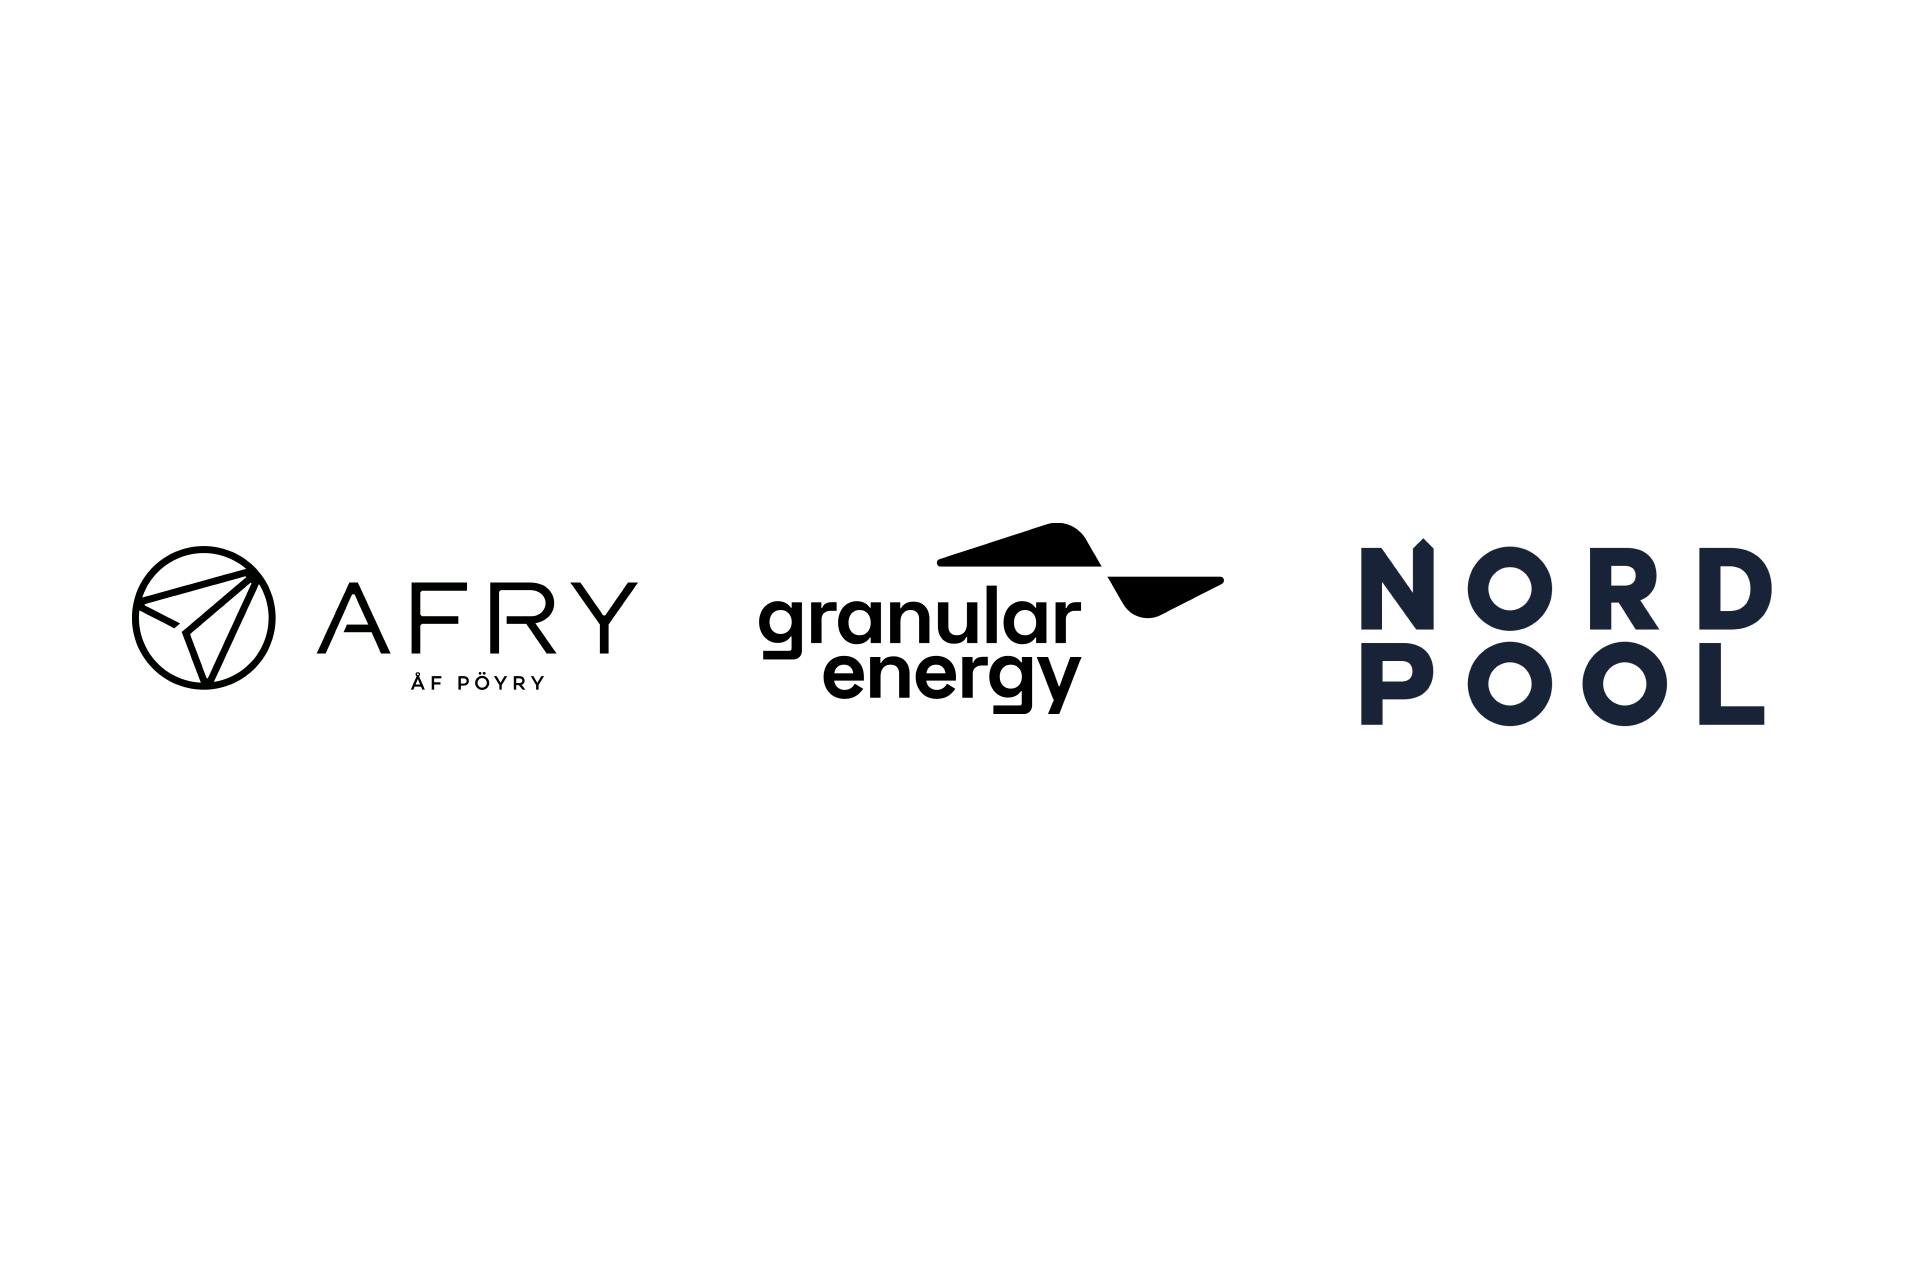 Nord Pool, AFRY, and Granular Energy